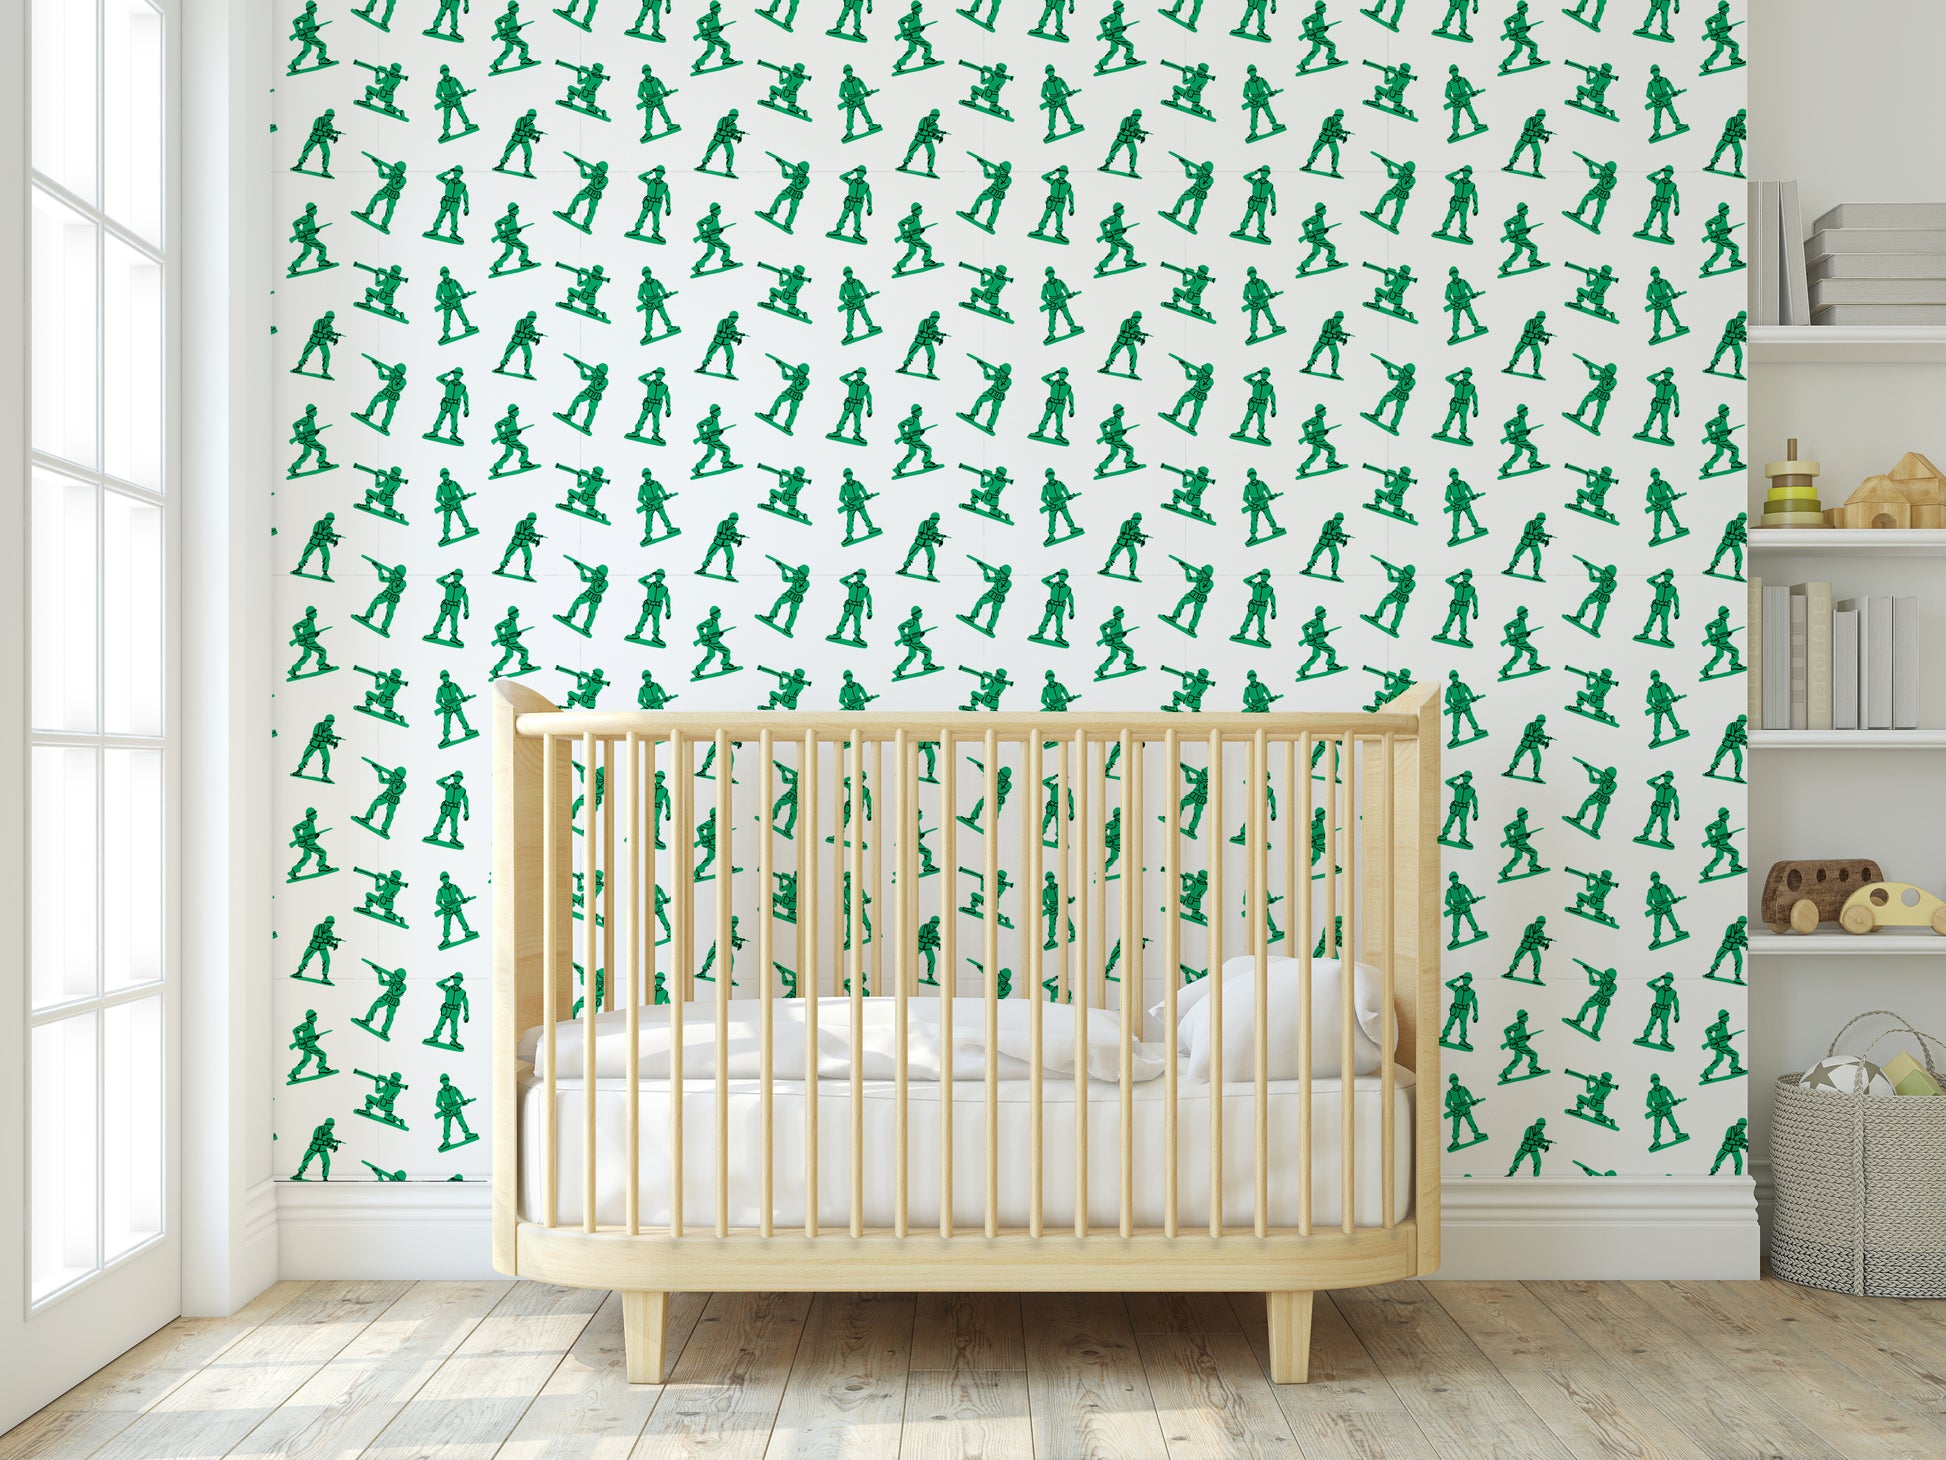 little green toy army men removable peel and stick wallpaper in nursery